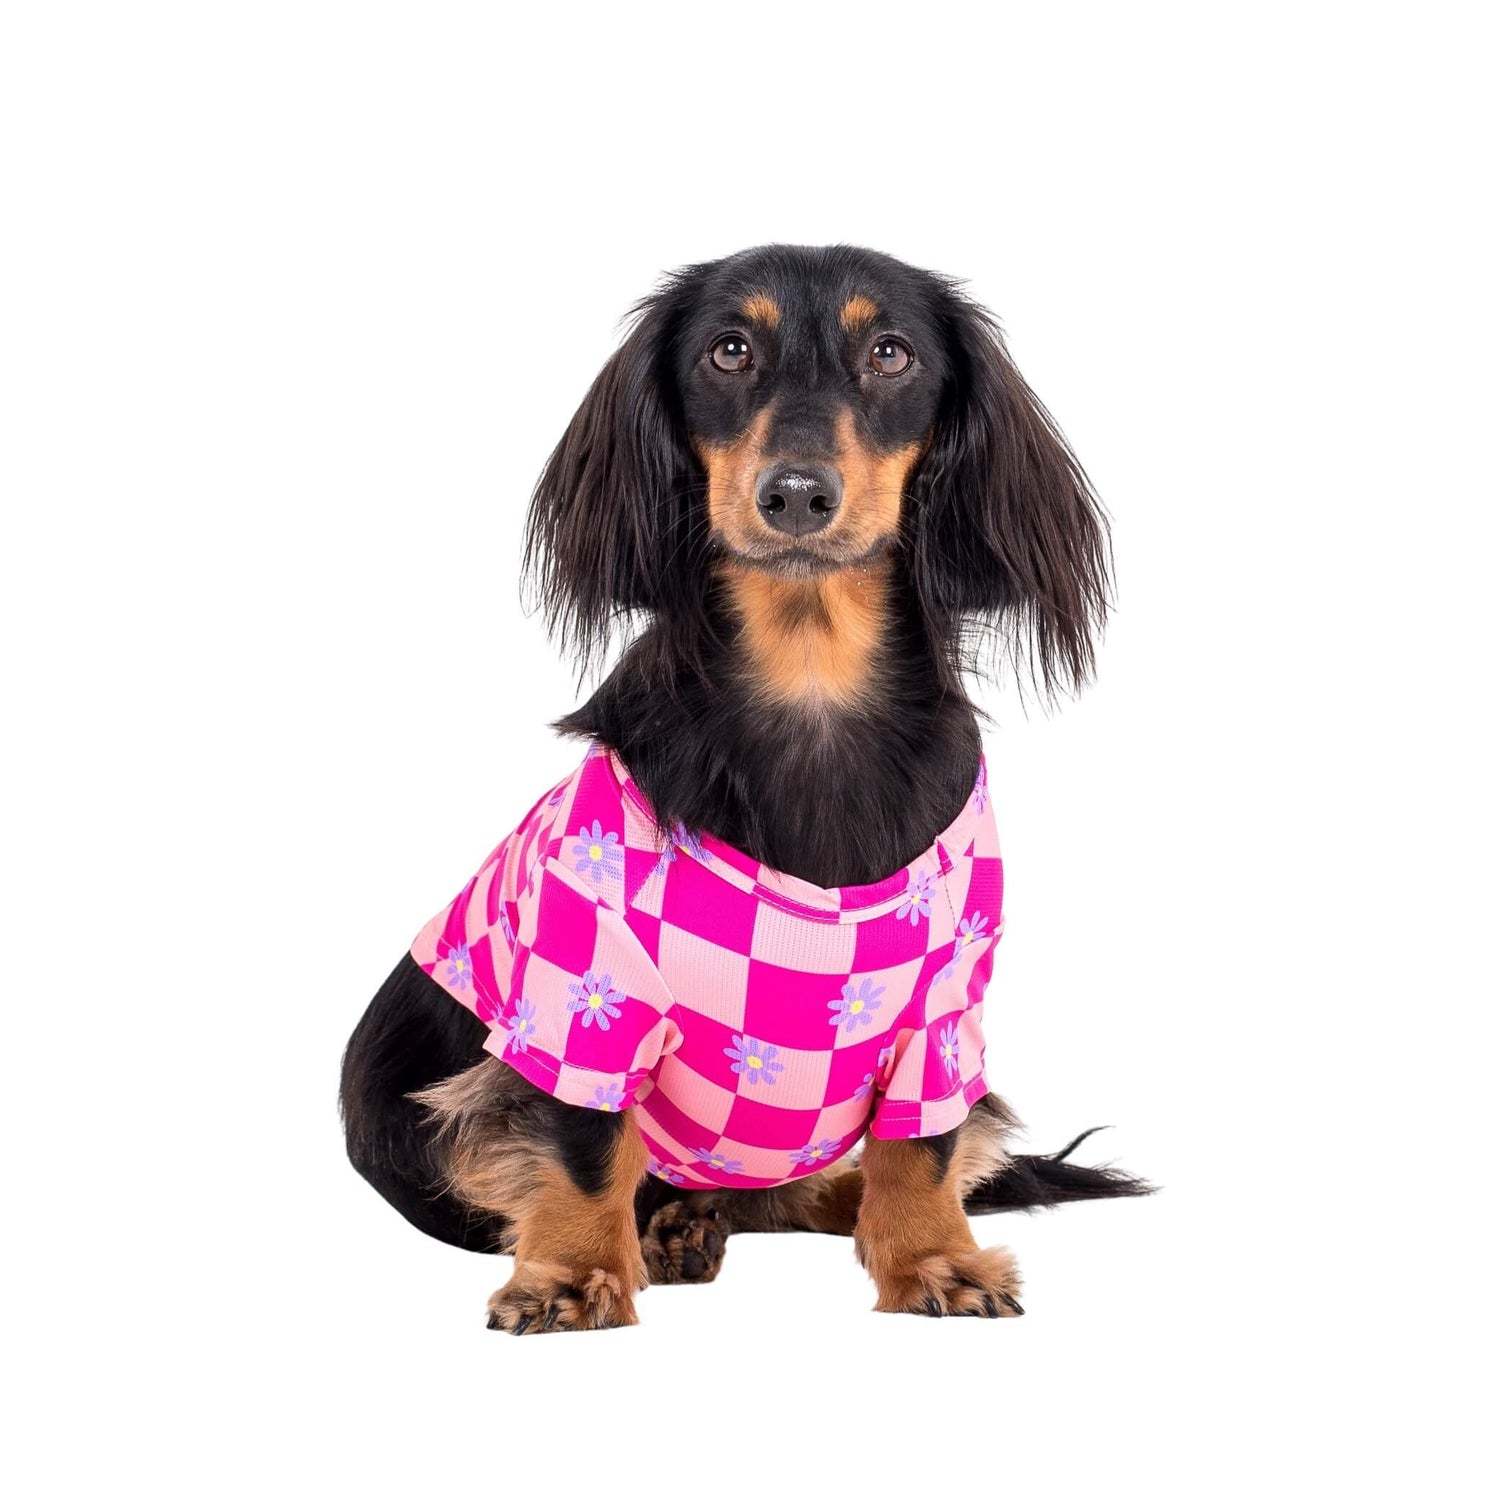 Daschund wearing Vibrant Hounds Crazy Daisy cooling shirt for dogs. It is pink chequered with daisys printed on it.